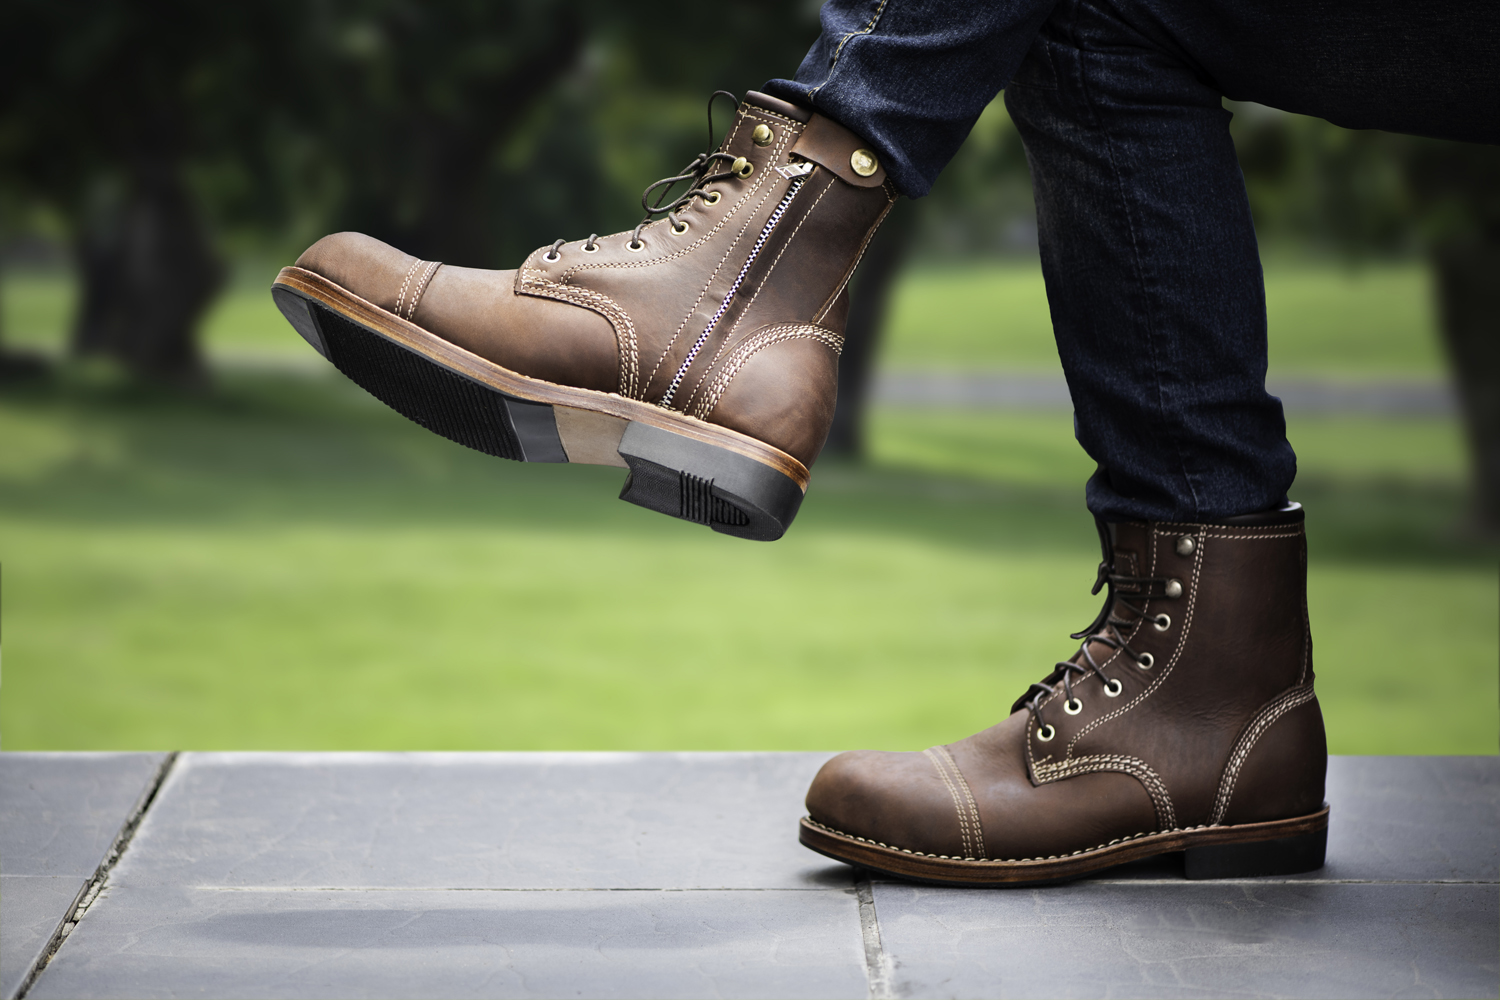 Endure Faial lens The 18 Best Boots for Men Who Care About Style in 2022 - The Manual